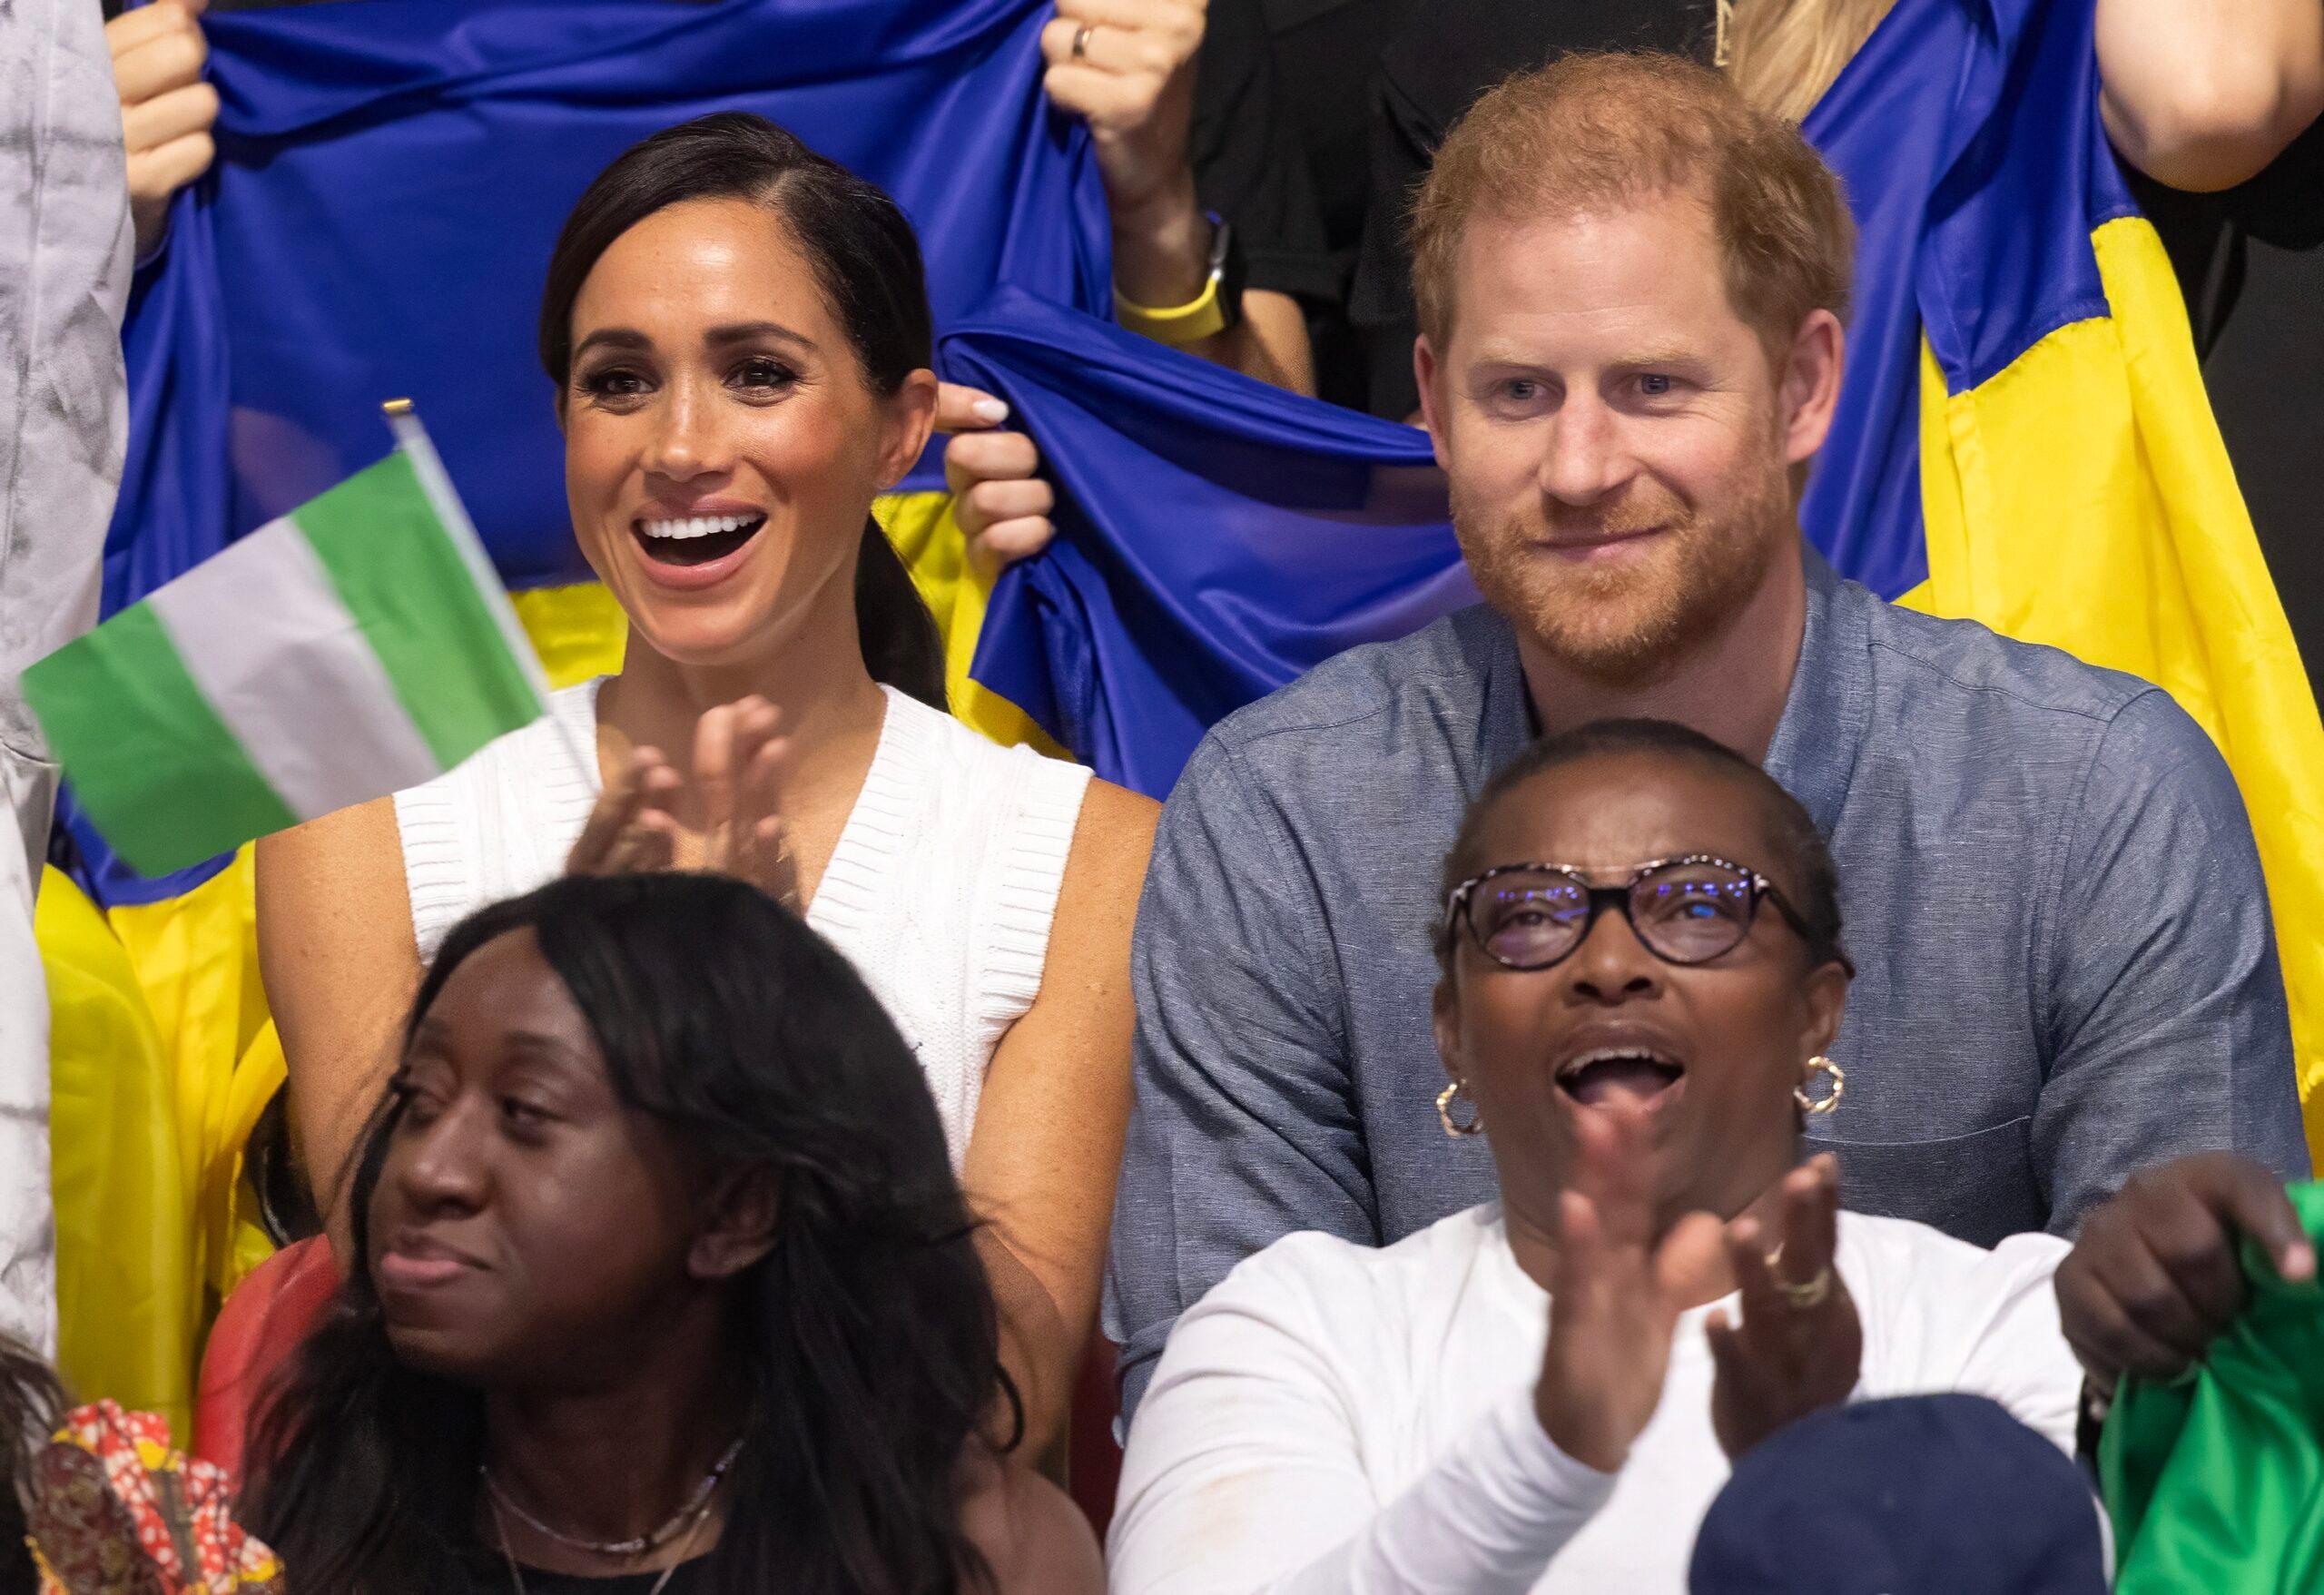 Prince Harry & Meghan Markle Set To Visit Nigeria Days After The Duke's Invictus Event In The UK